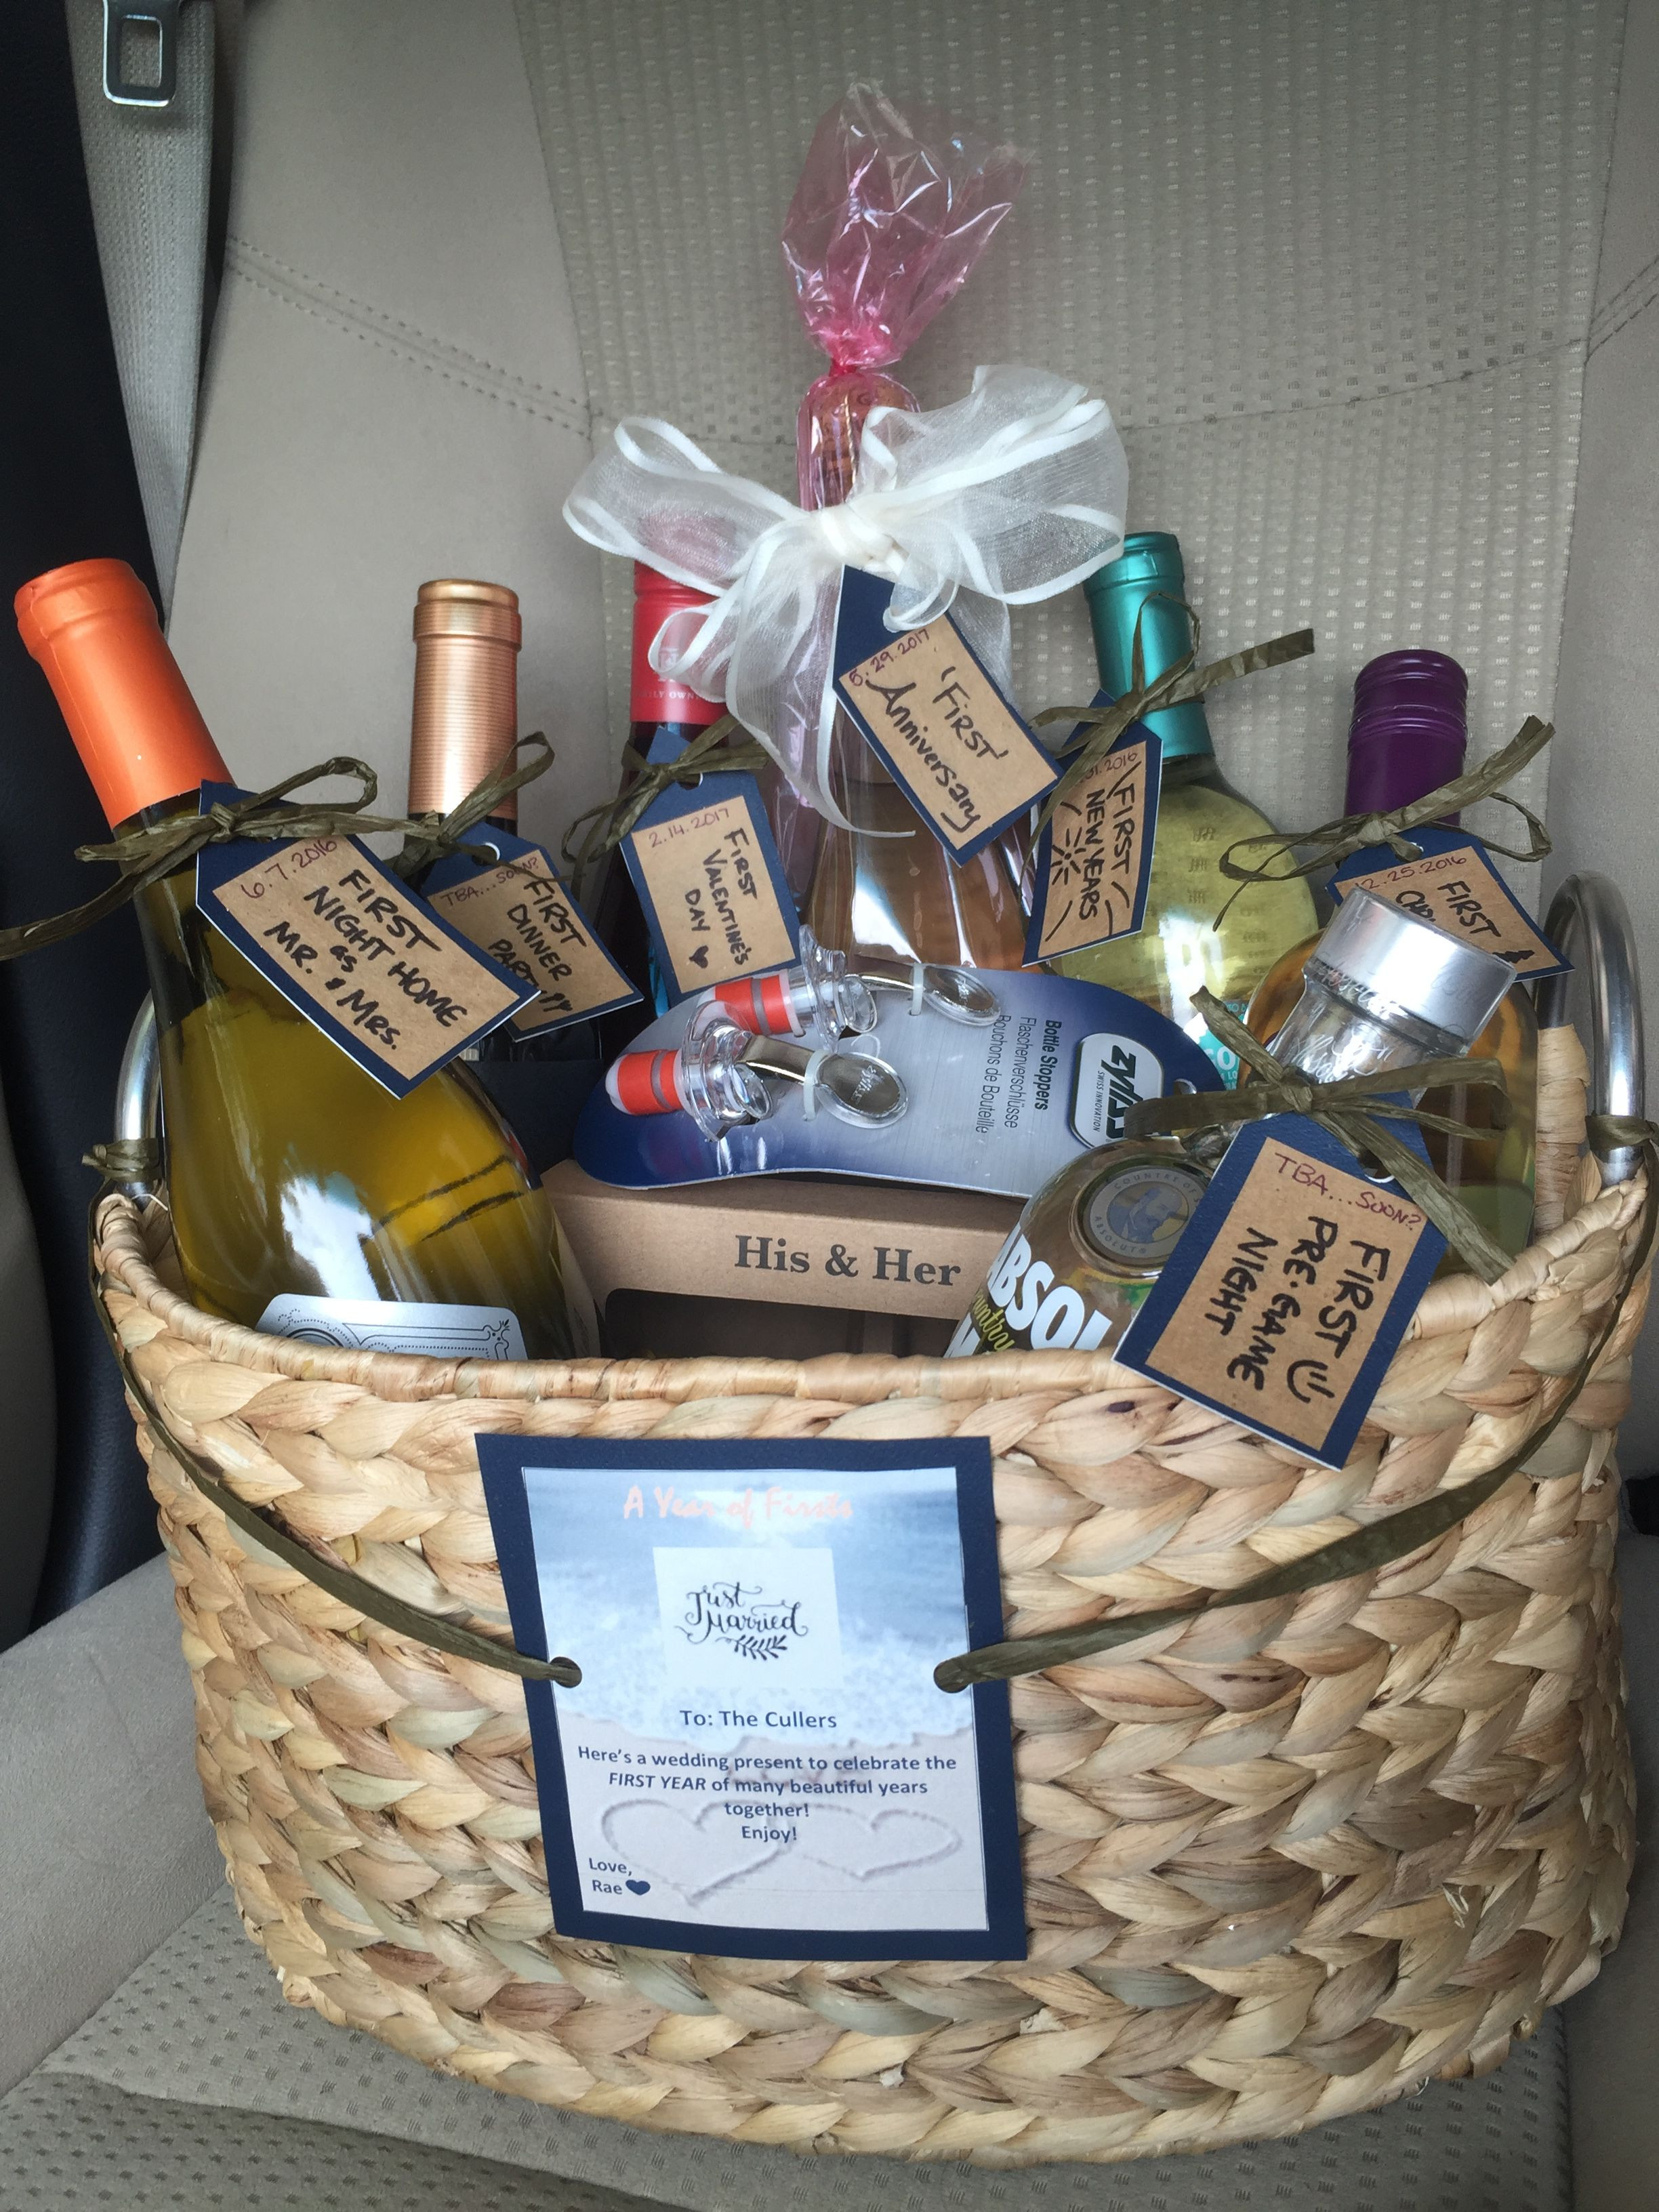 Couple Gift Basket Ideas
 A year of firsts The BEST and easiest wedding present for